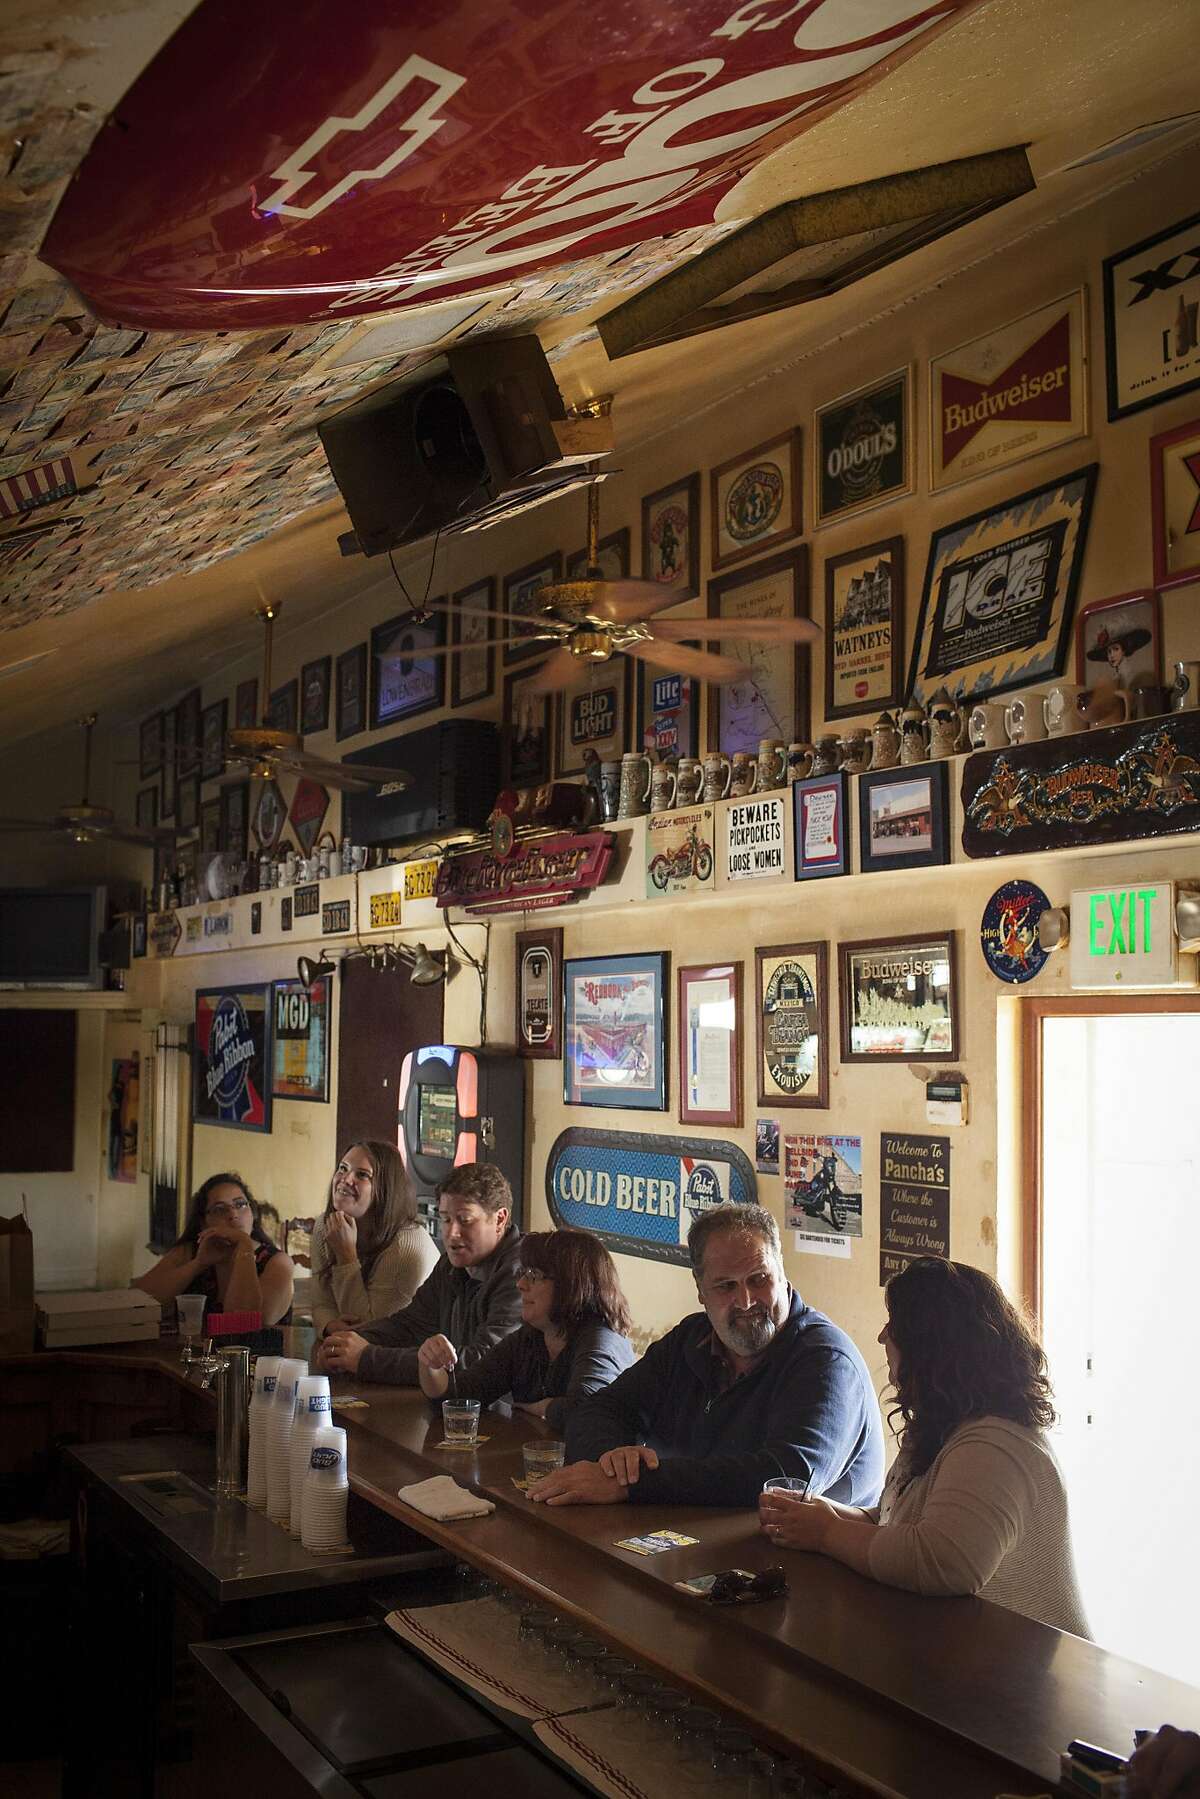 Patrons drink beers and cocktails at Panchas bar in Yountville, California, USA 12 Oct 2016, which caters to mainly wine industry workers and locals. (Peter DaSilva/Special to The Chronicle)